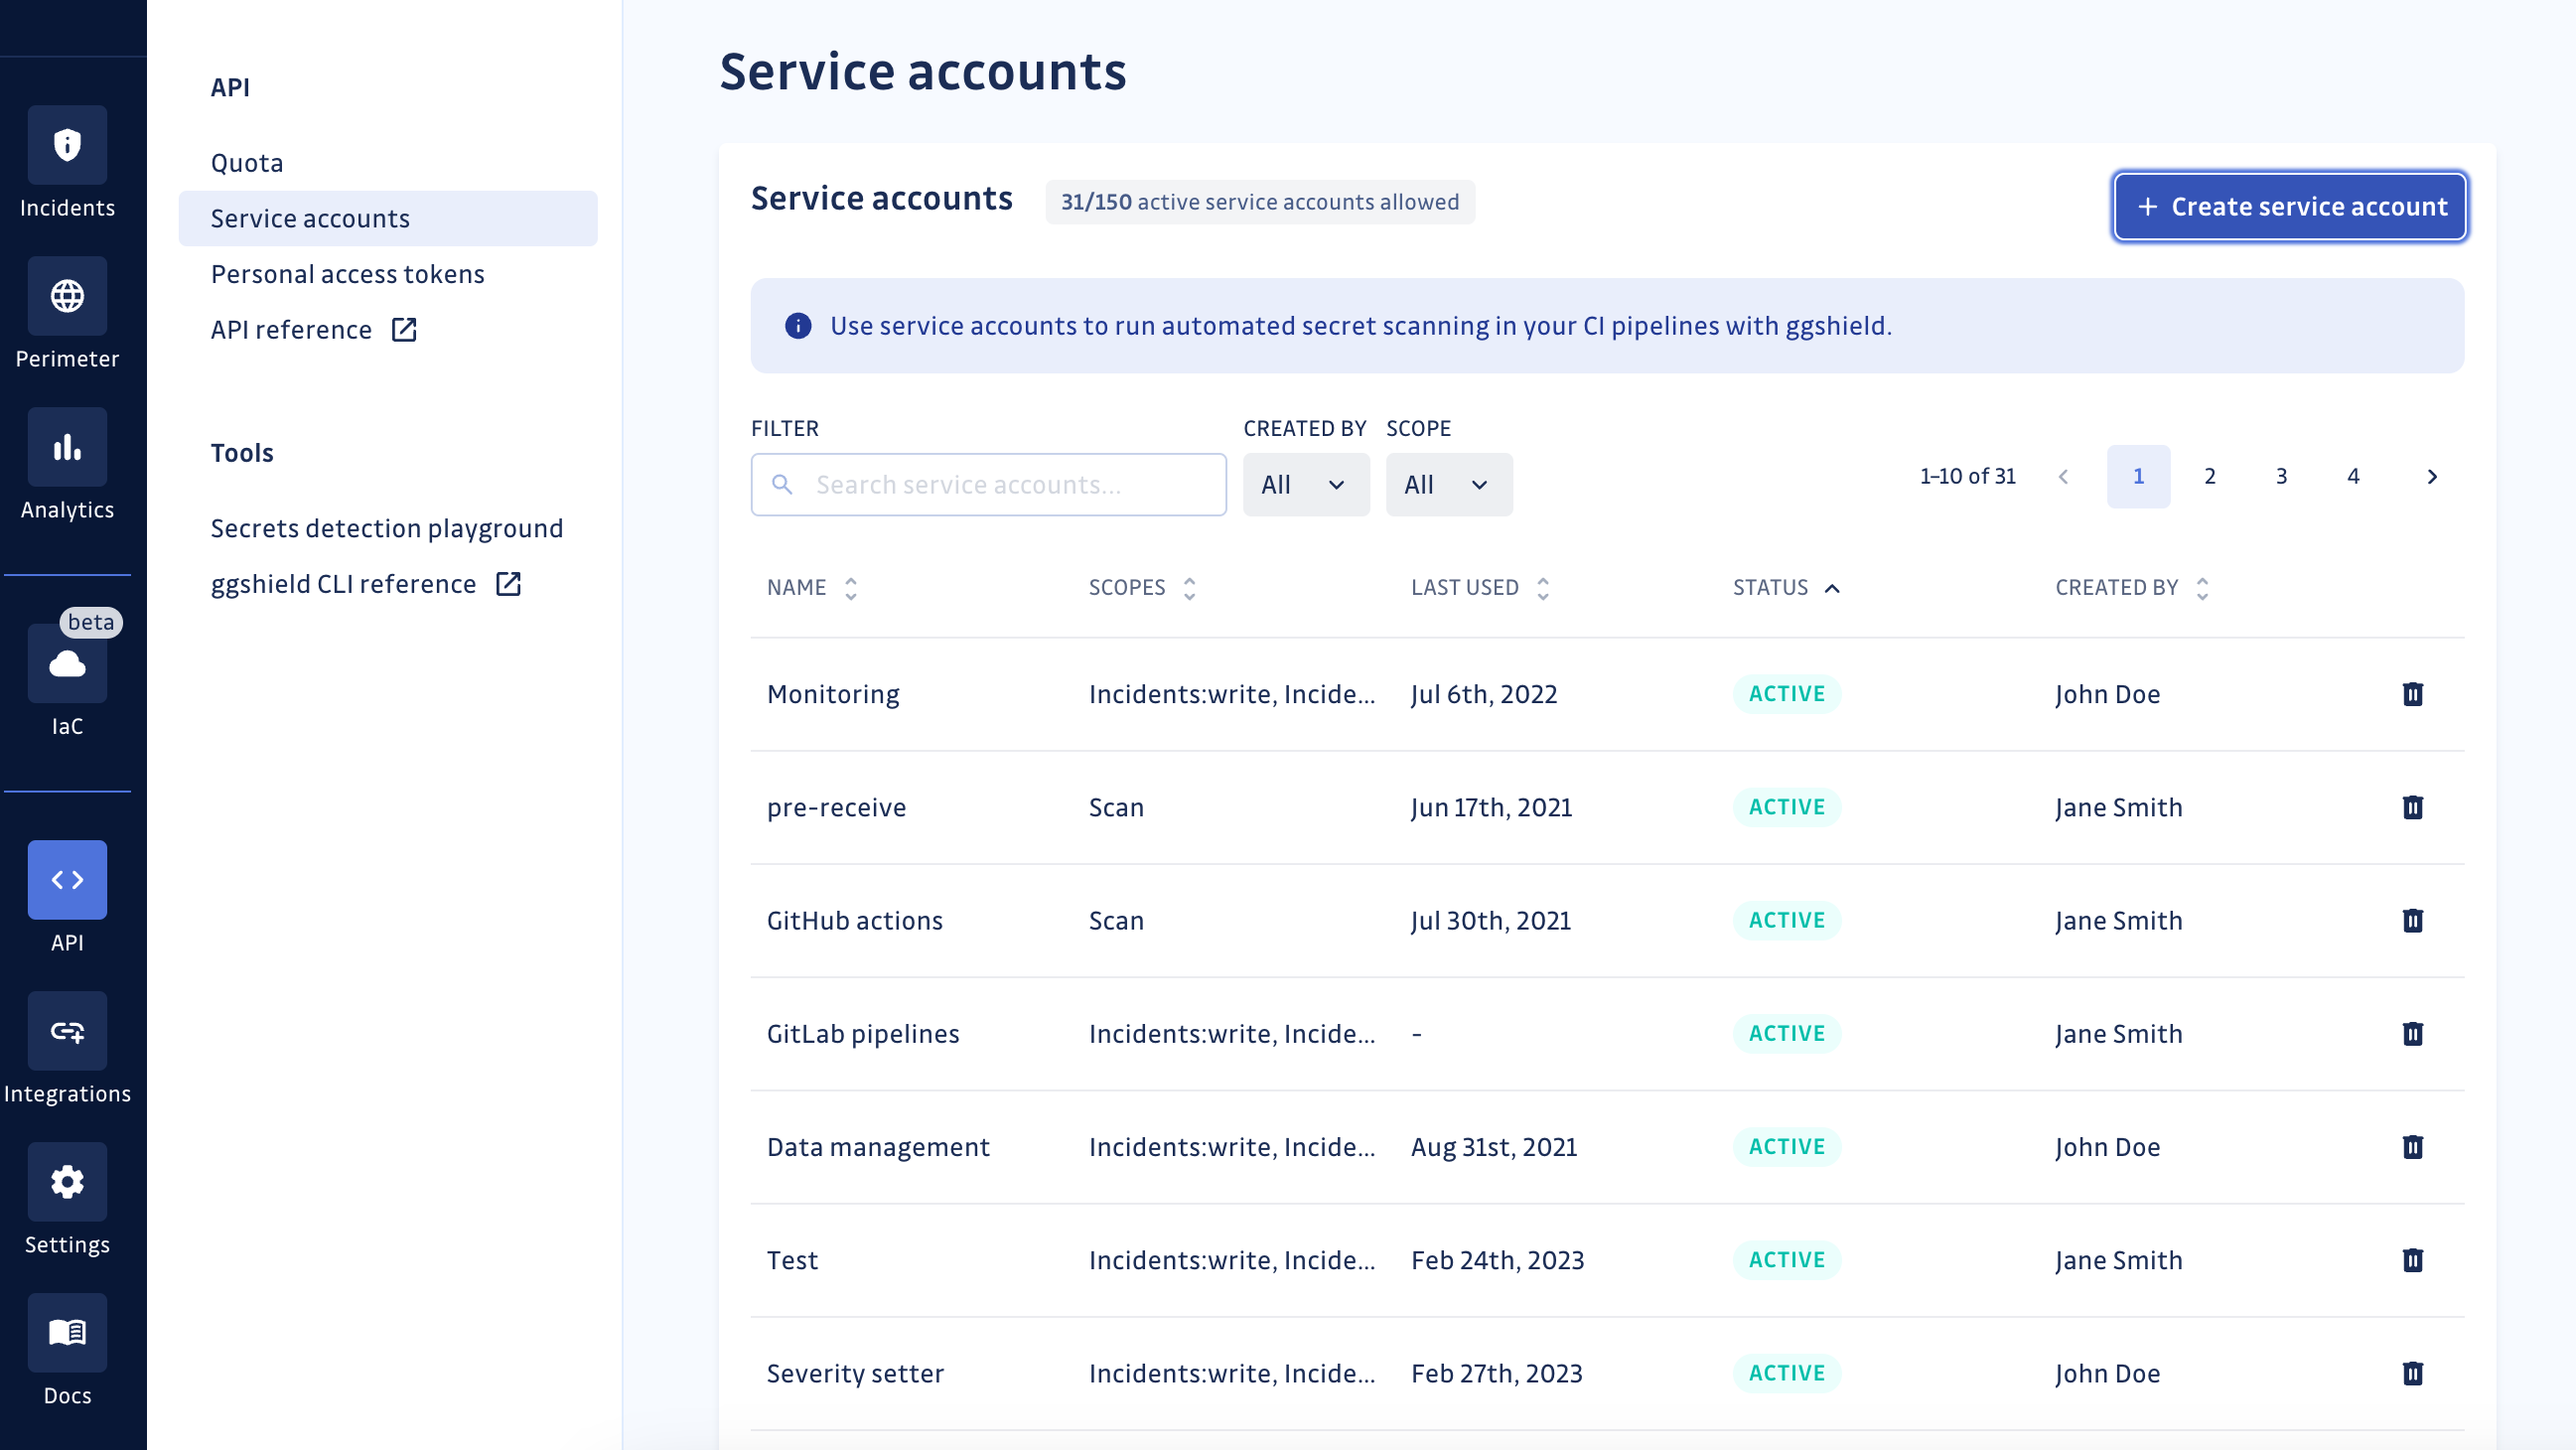 Service accounts table